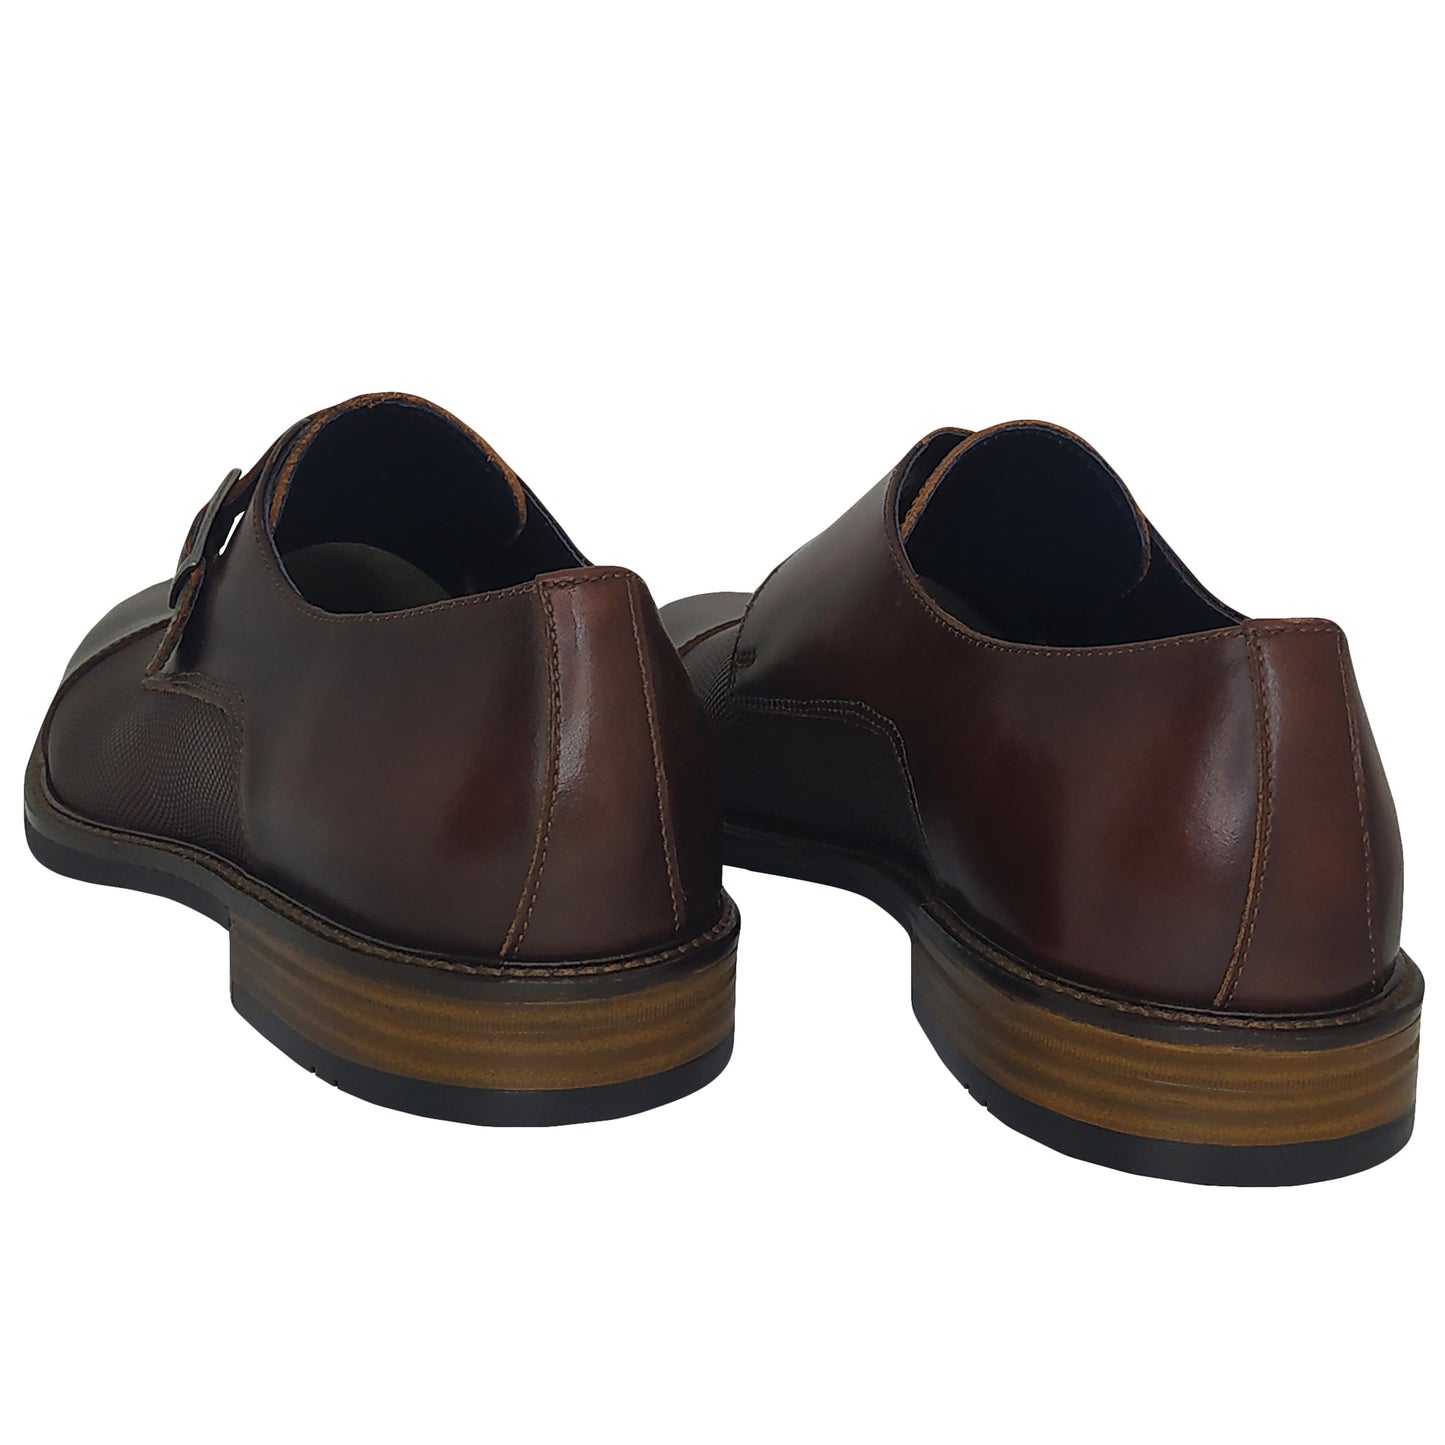 Handmade Leather Monk Straps Shoes with Brown Token 626